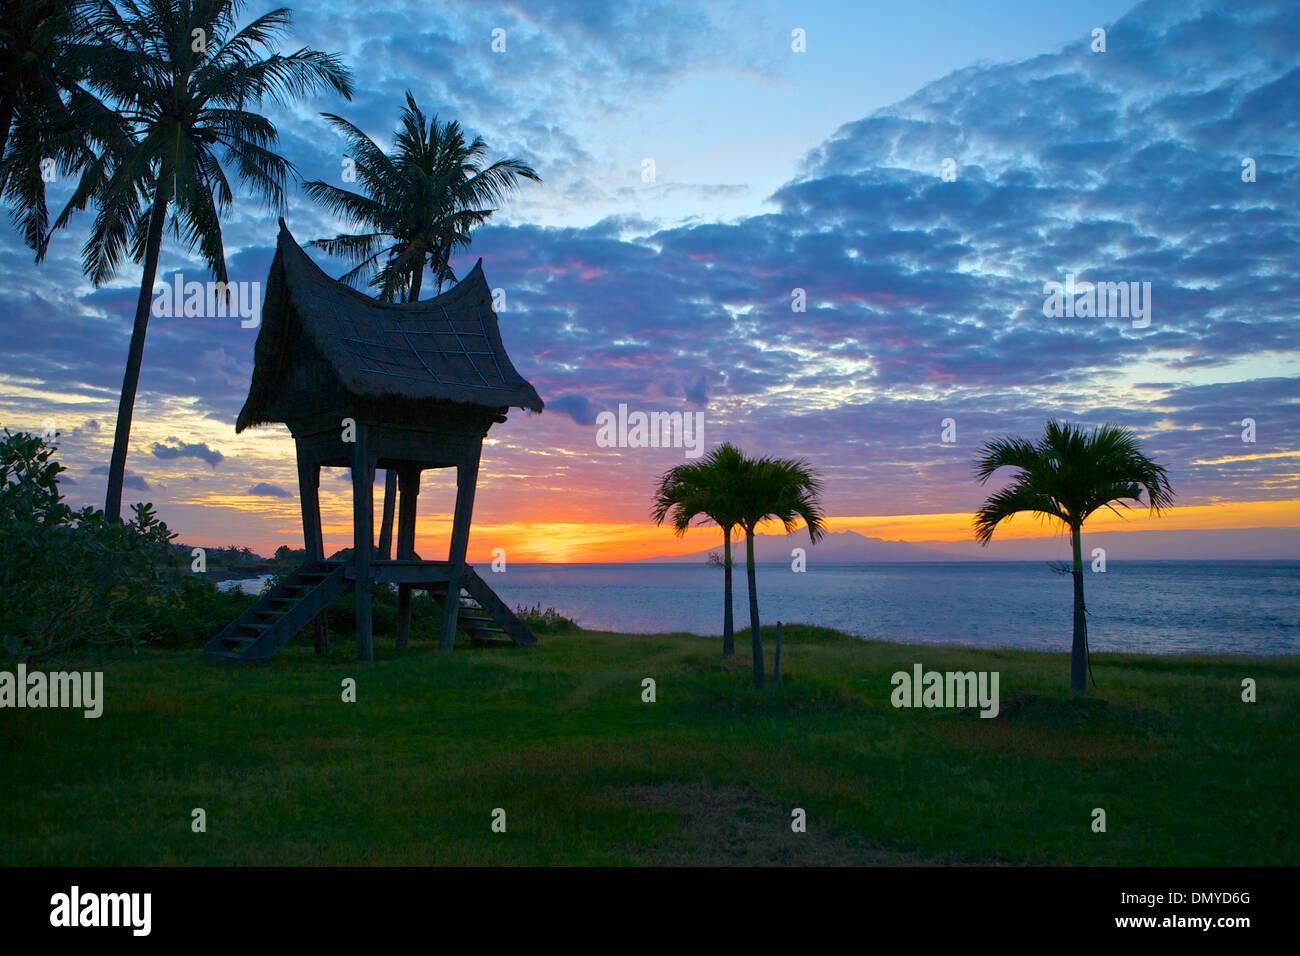 Sunset on the beach in Eastern Bali, Indonesia Stock Photo